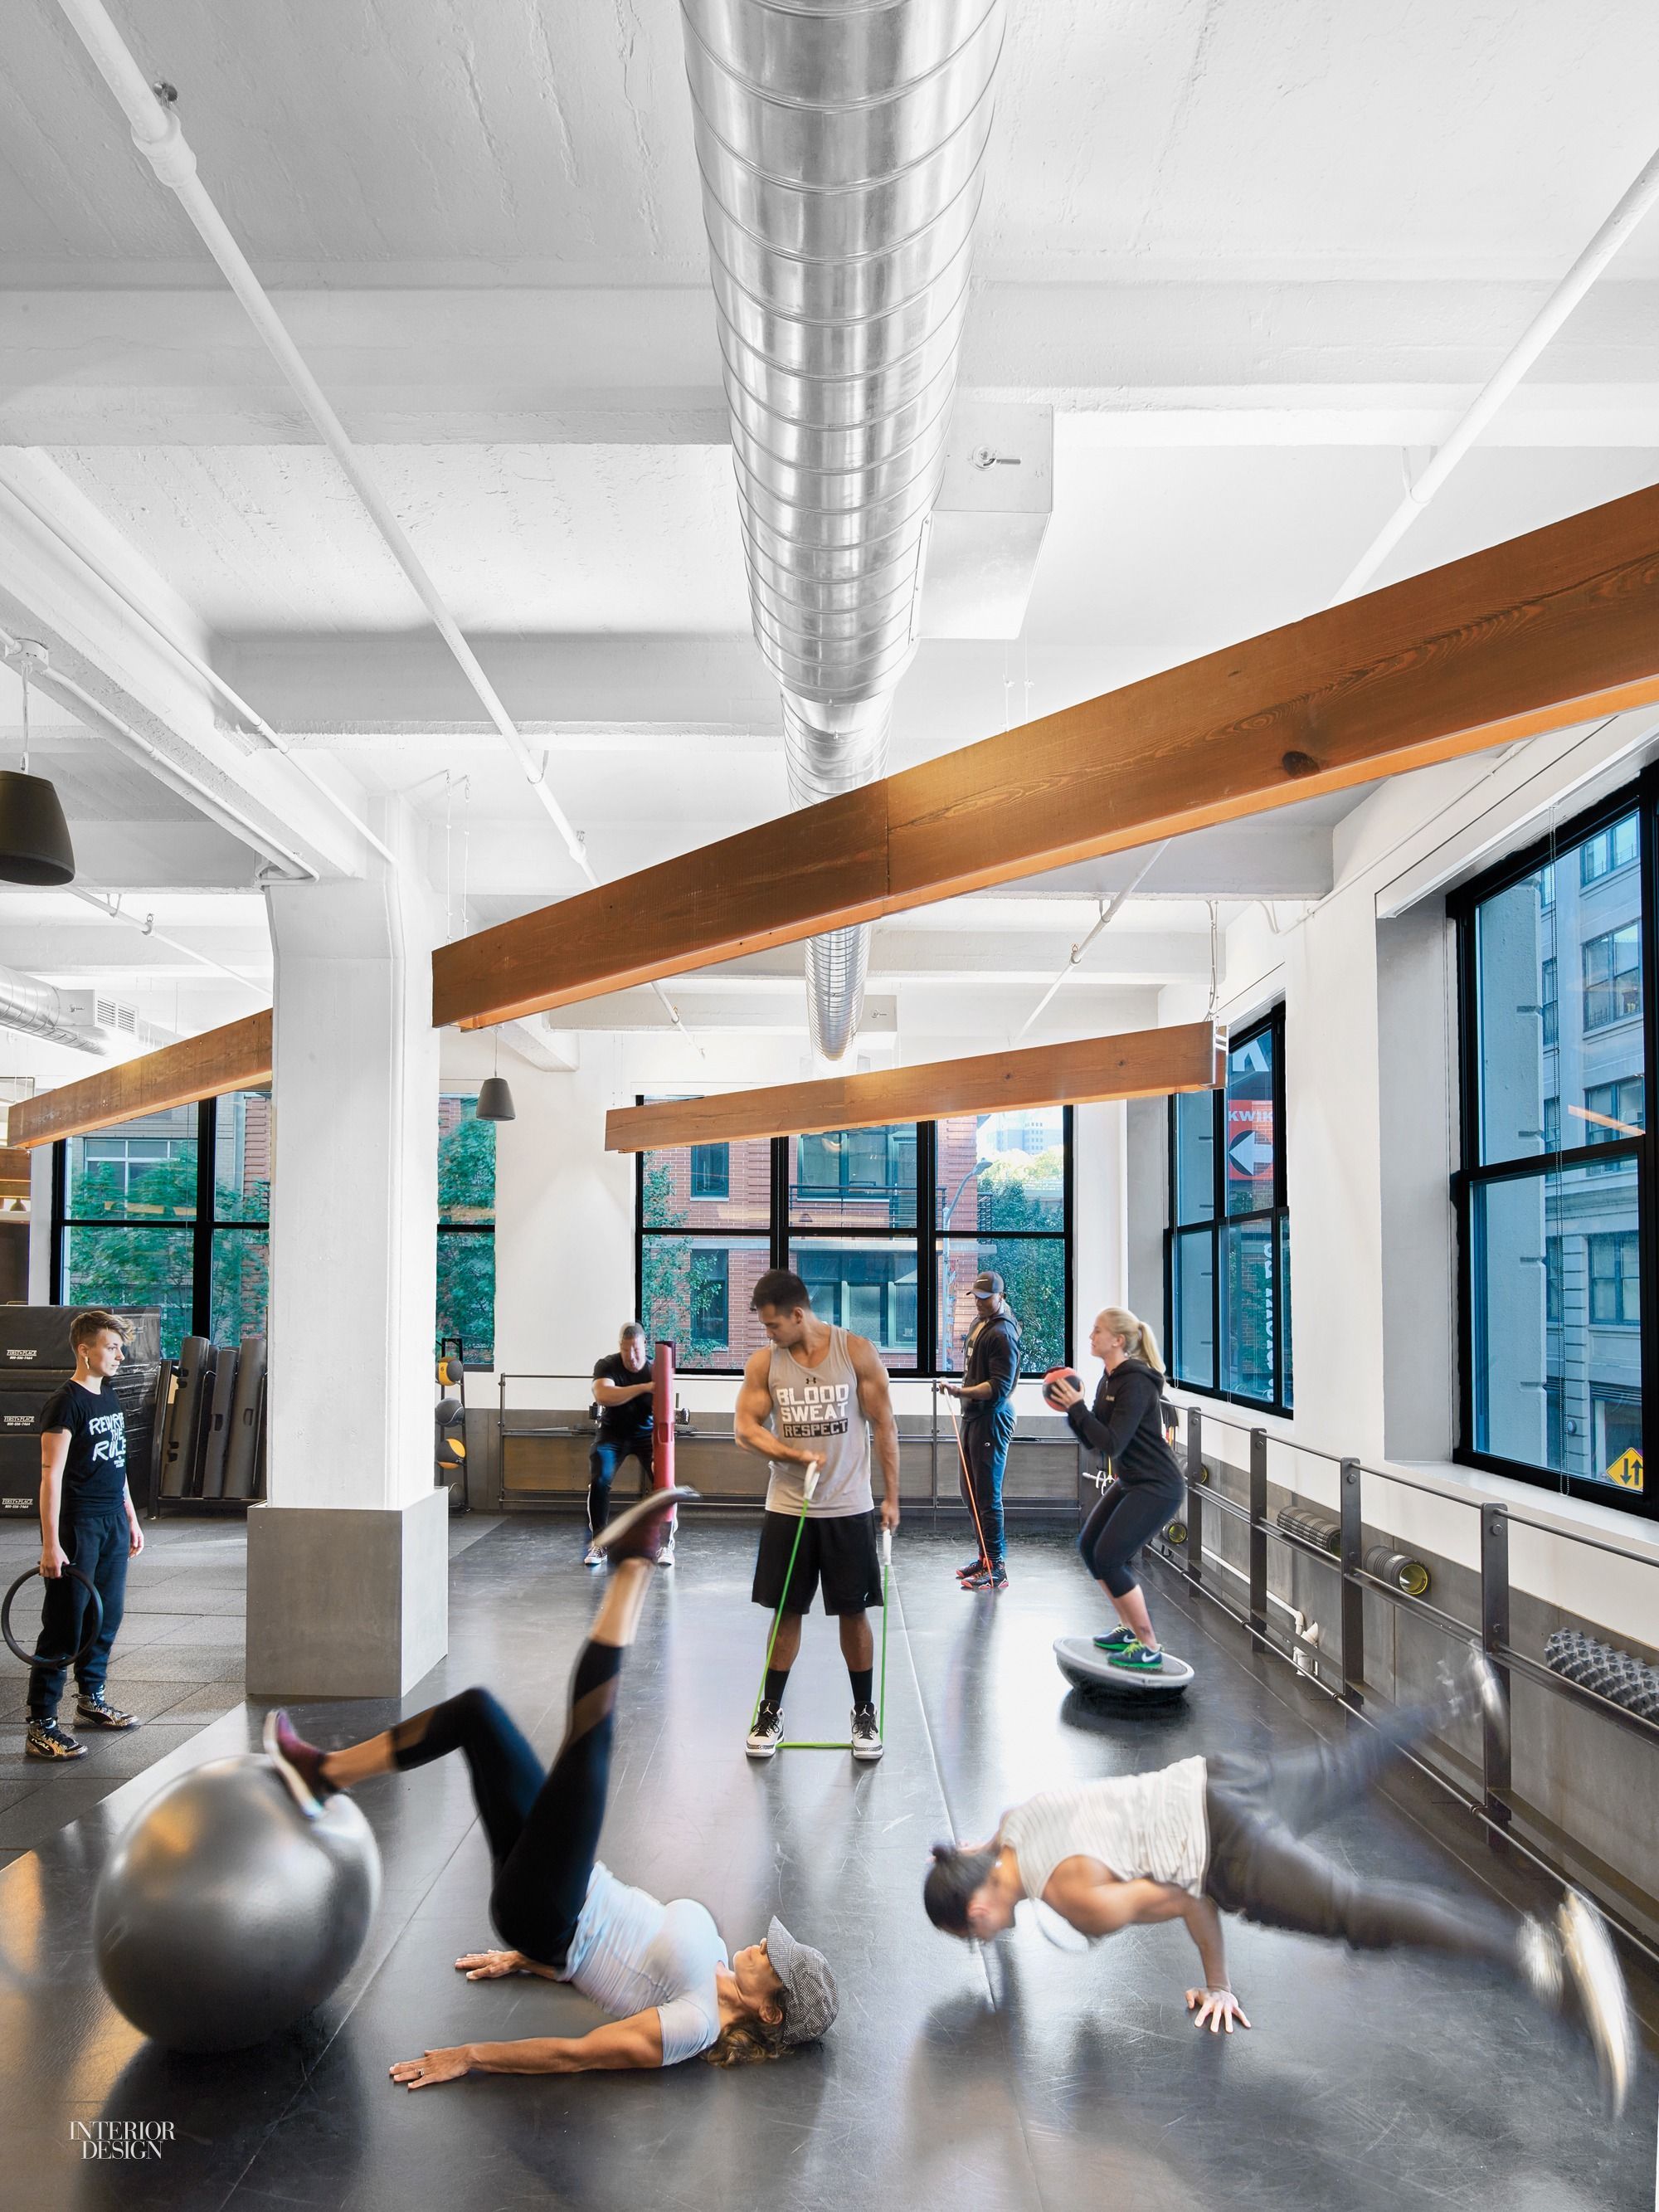 Inc Architecture & Design Gives an Equinox Gym the Loft Treatment in Brooklyn -   13 office fitness Center ideas